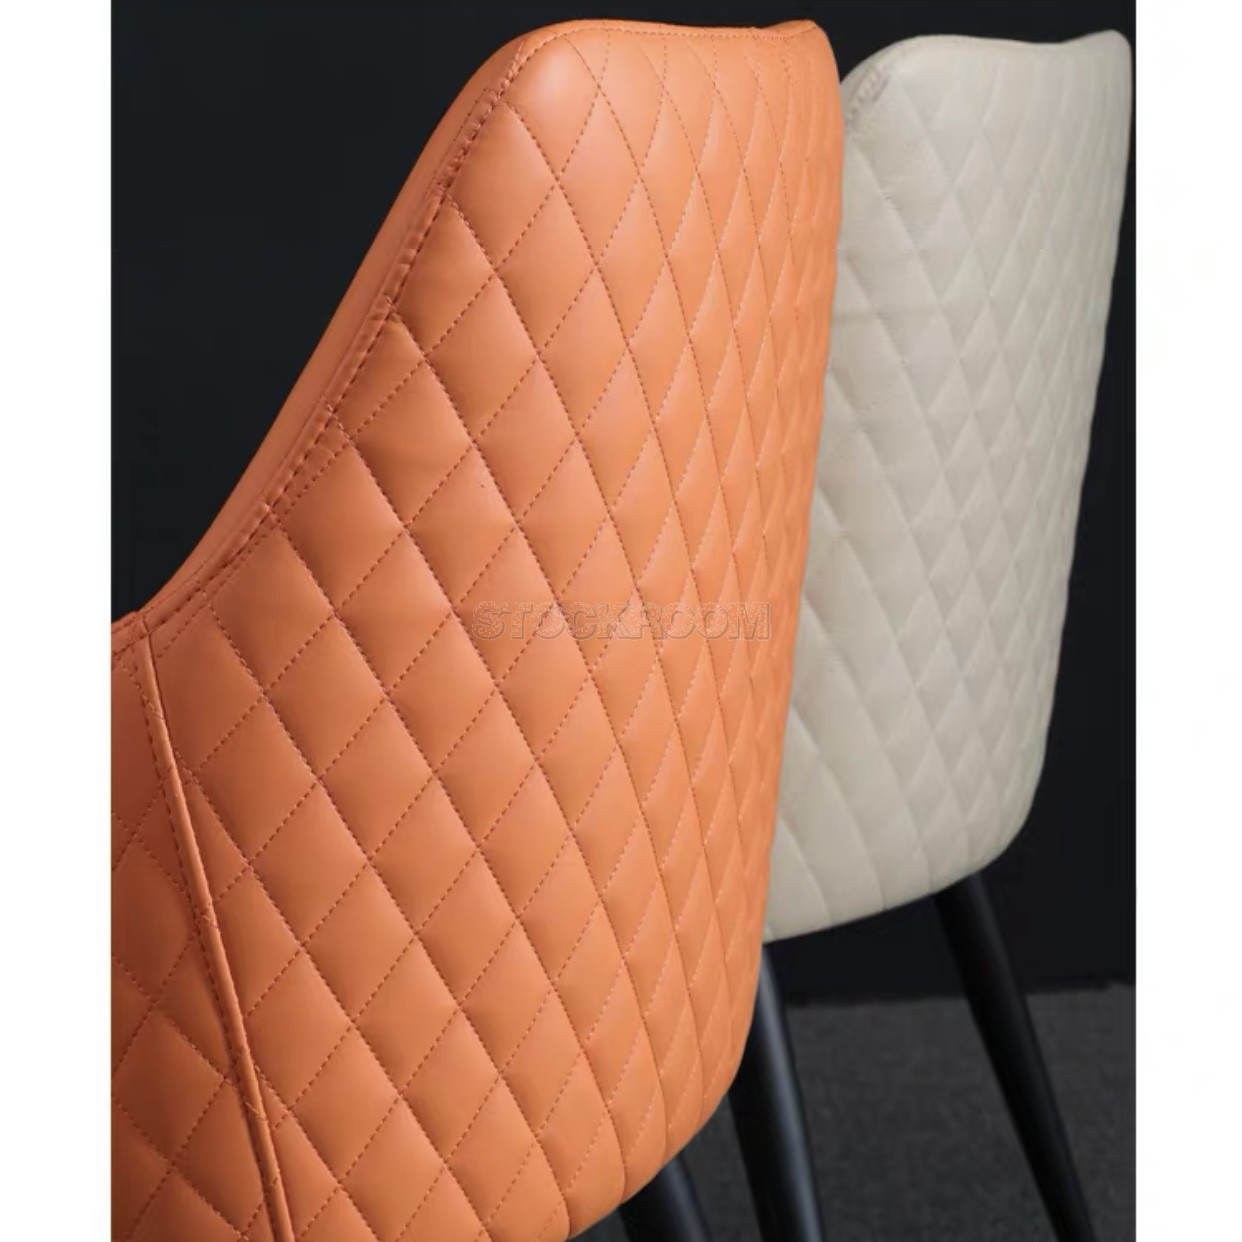 Michel Leather Upholstered Dining Armchair